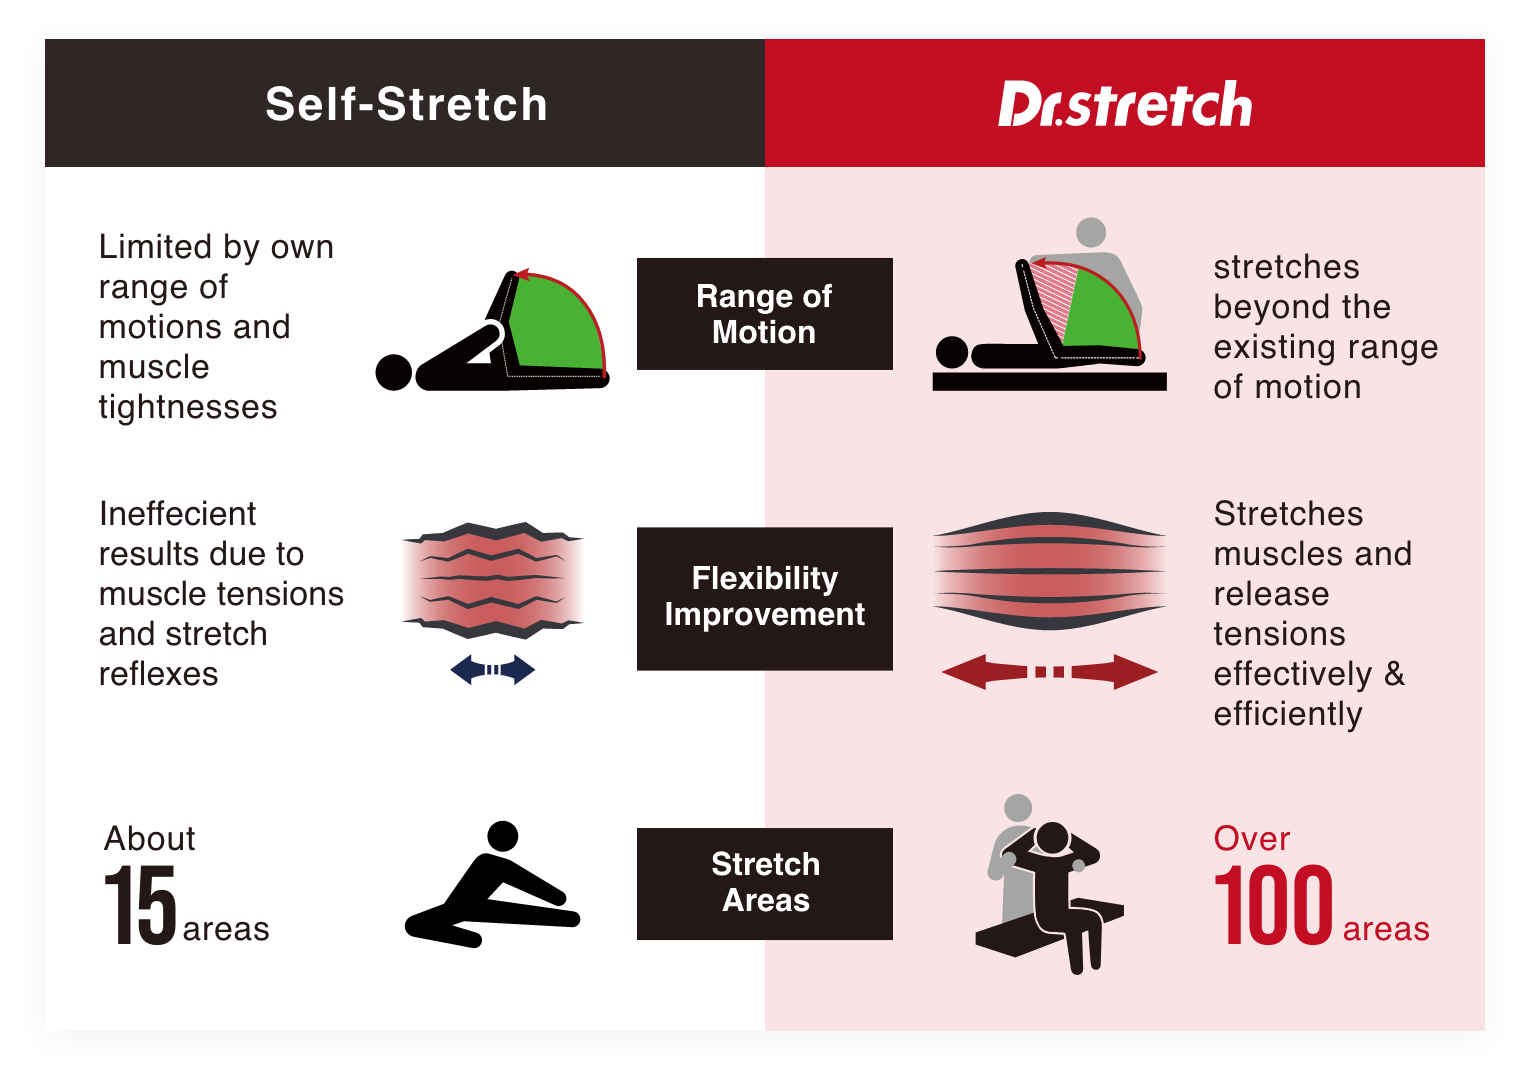 Comparing with Self-Stretch